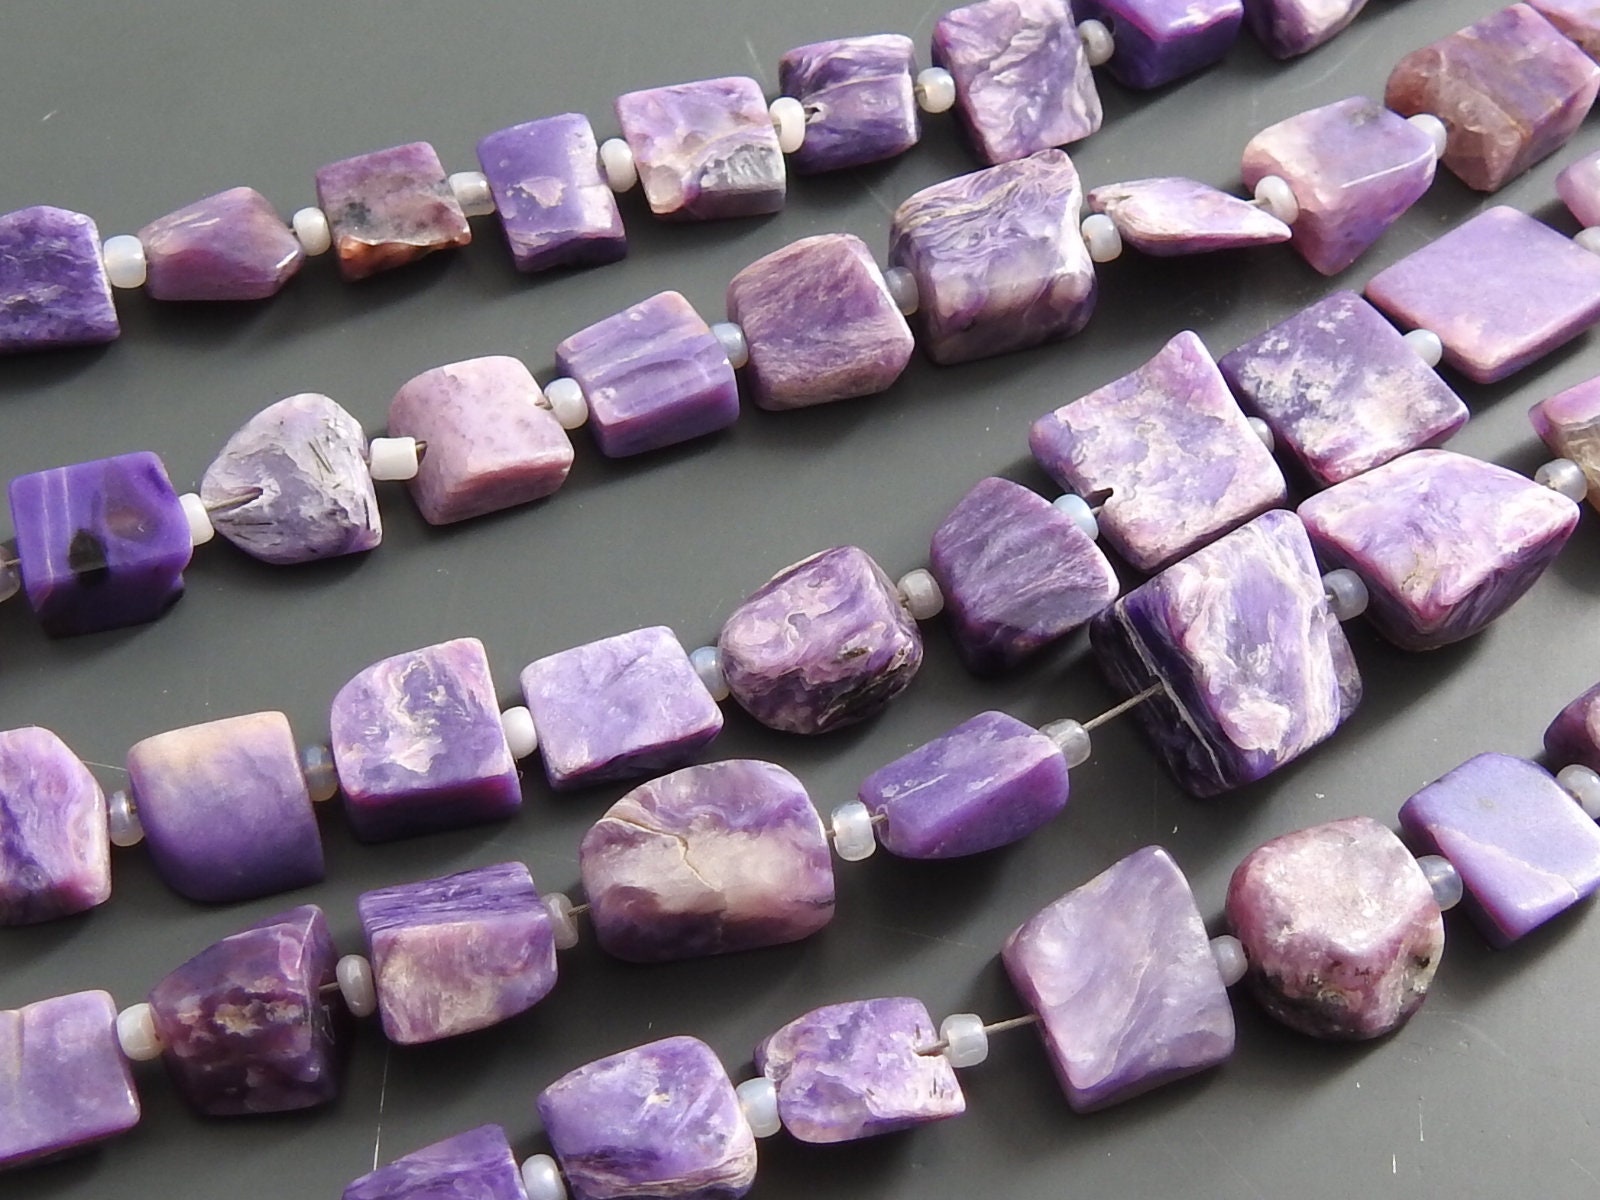 Charoite Natural Rough Bead,Nuggets,Tumble,Uncut,Loose Raw,Minerals Gemstone,For Making Jewelry,Wholesaler,Supplies 11X7To5X4MM Approx R4 | Save 33% - Rajasthan Living 15